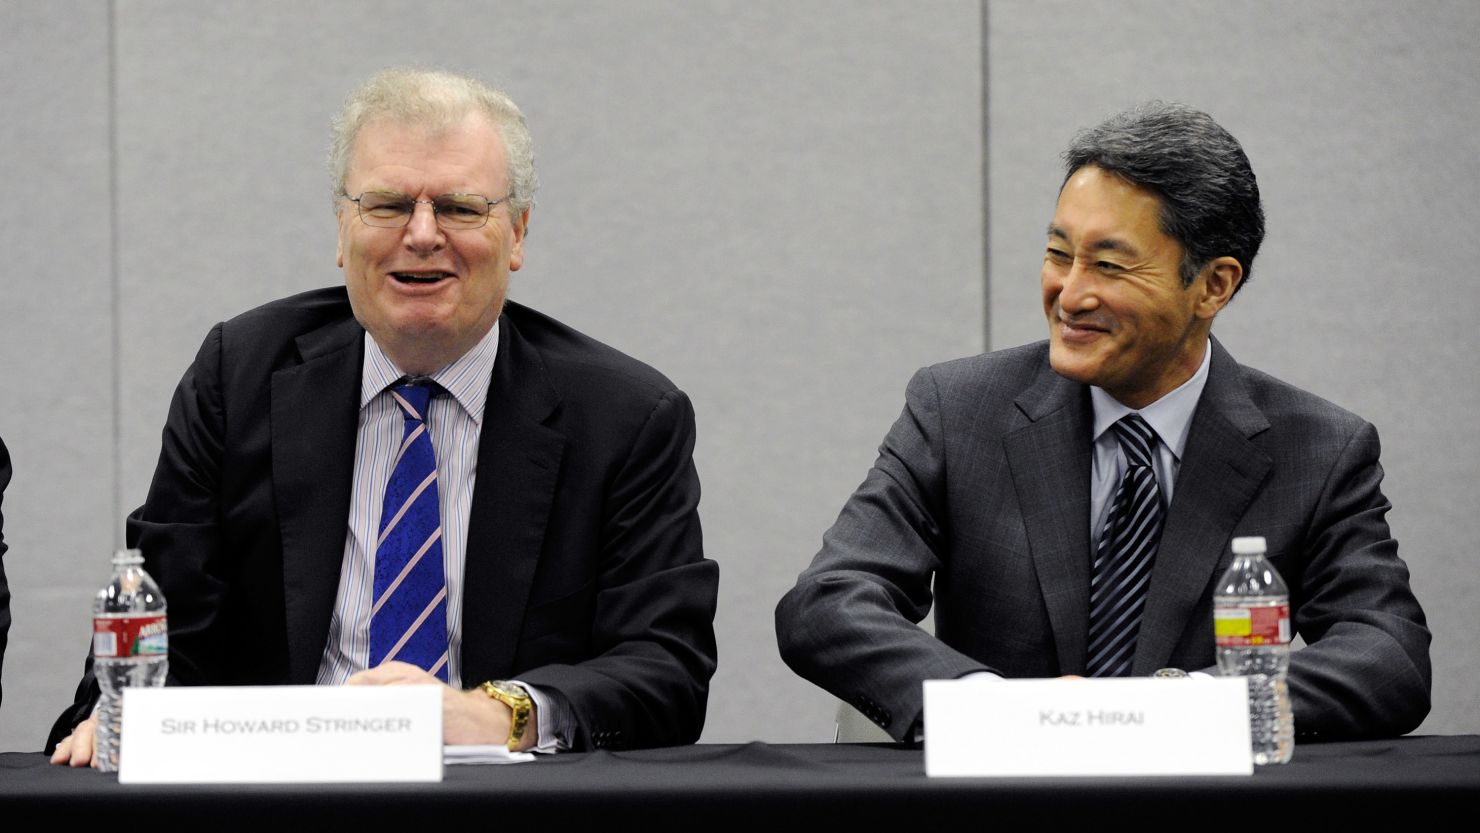 Chairman, CEO and President of Sony Corp. Sir Howard Stringer (L) and Sony Corp. Executive Deputy President Kazuo Hirai attend a Sony press event in January.